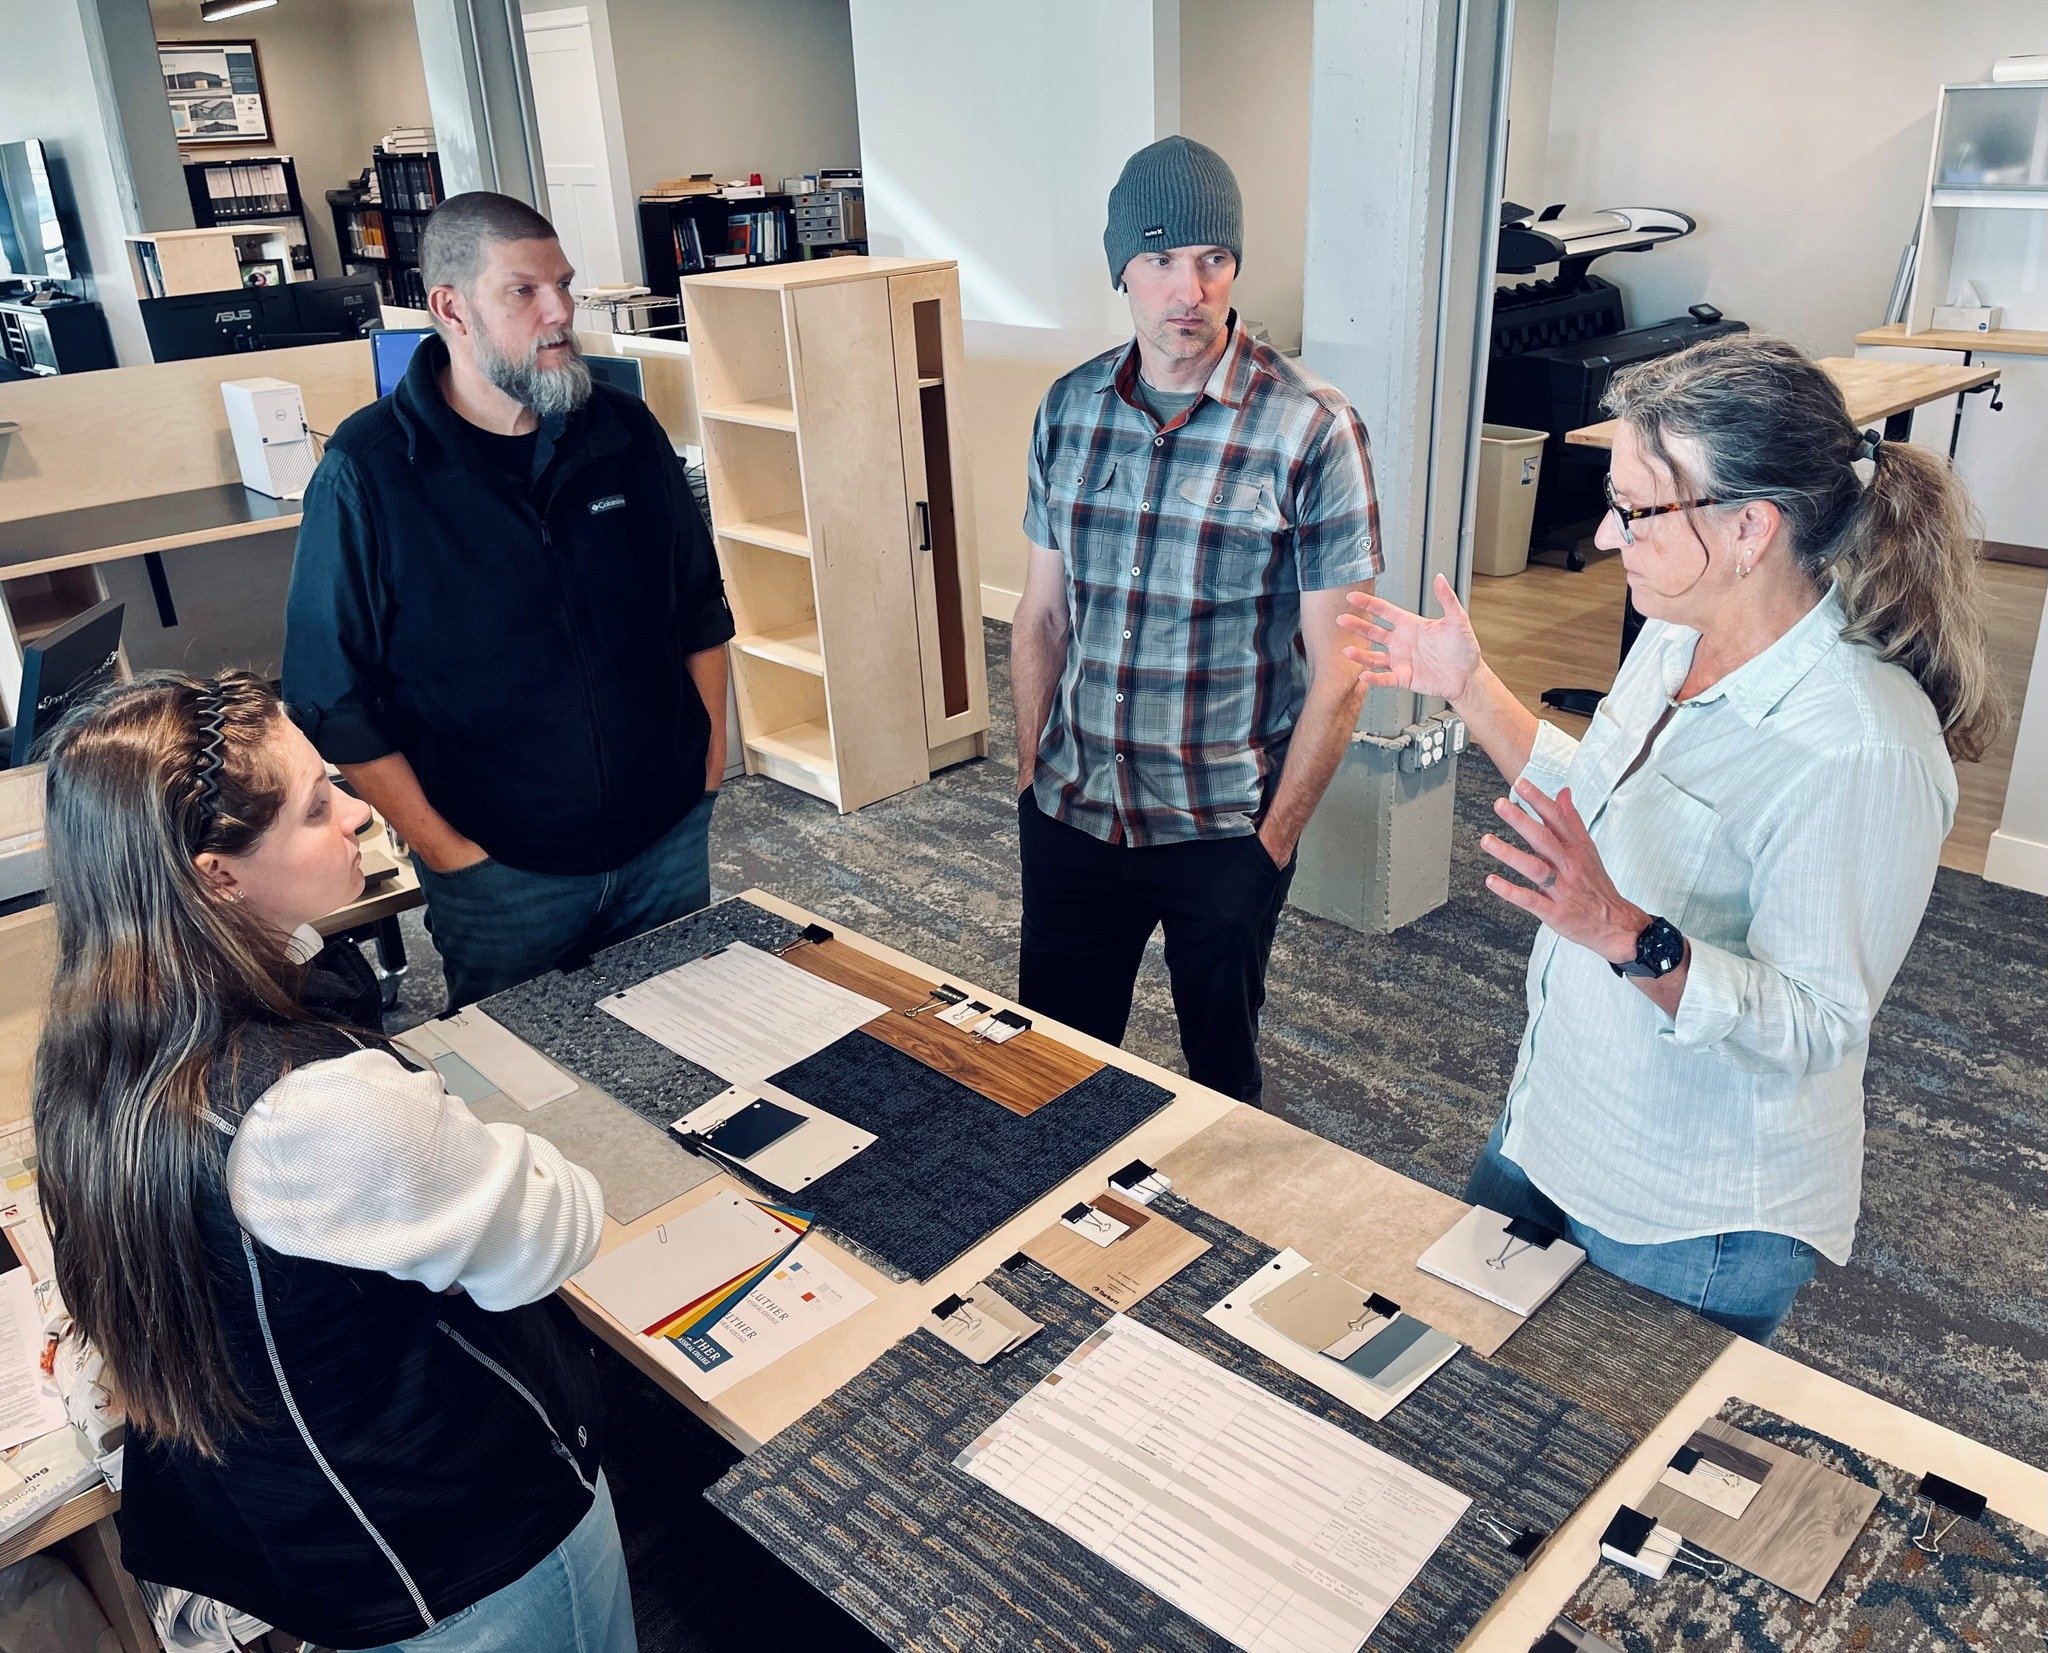 Interior design discussion is underway for the Luther Classical College in Casper. Presenting our clients with options is important, as is understanding the specifications of a product, its benefits and potential hurdles.

#design #architecture #buil